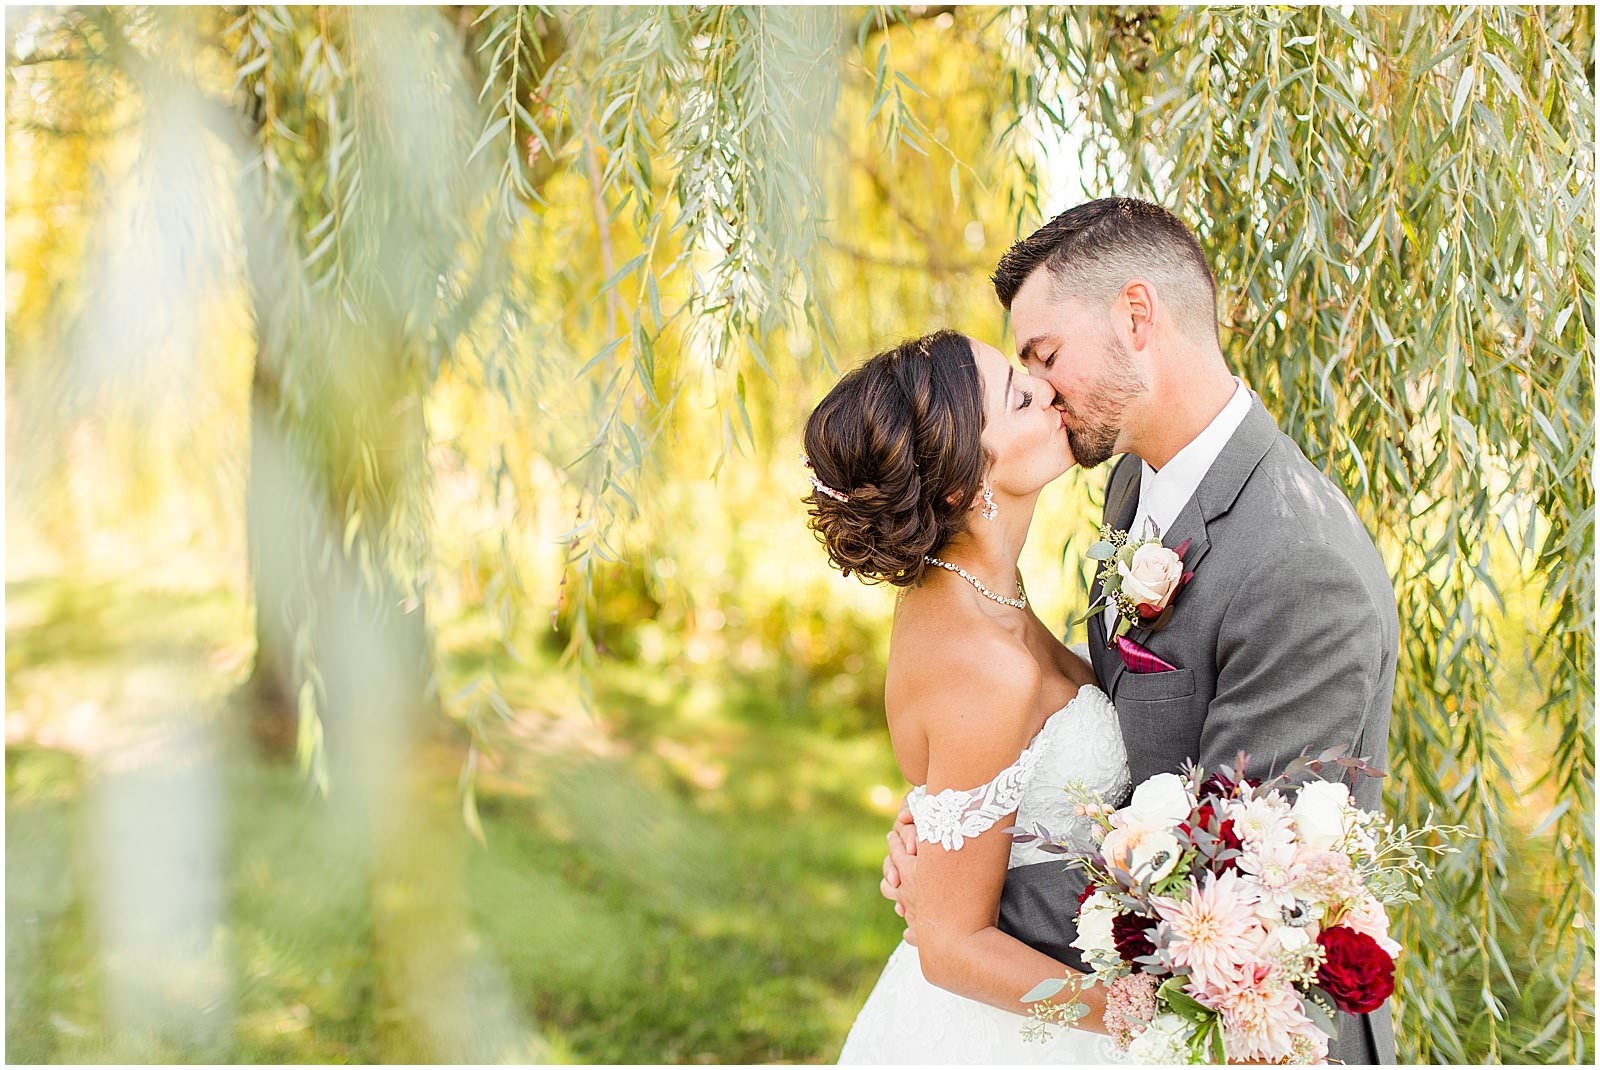 A Stunning Fall Wedding in Indianapolis, IN |. Sally and Andrew | Bret and Brandie Photography 0062.jpg